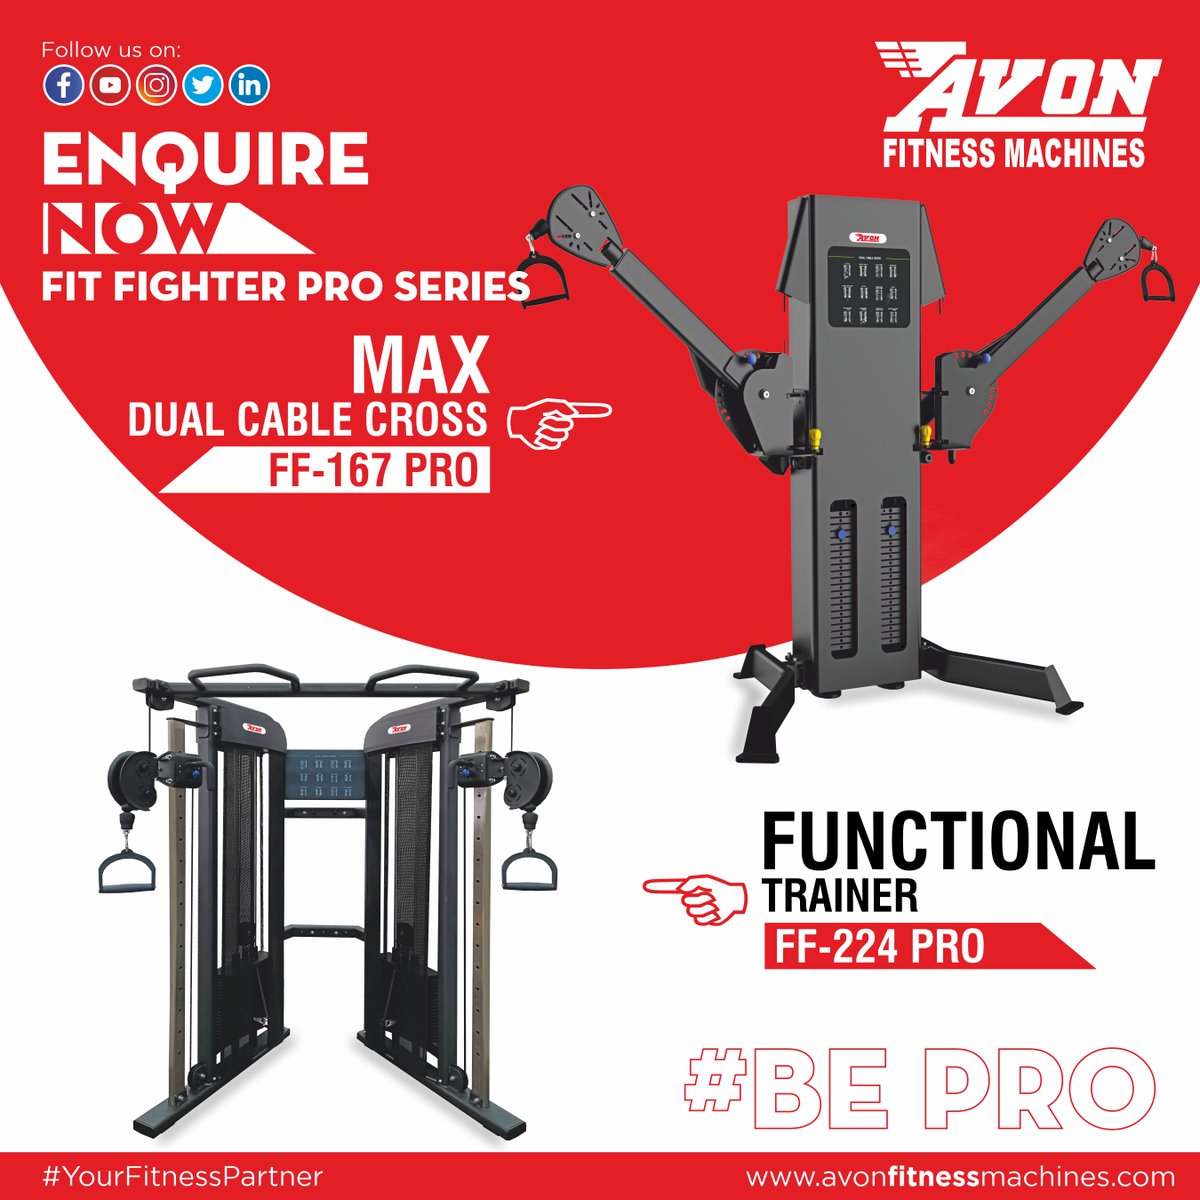 Widen and shape your Chest, Triceps, Biceps, Shoulders, and more  muscles with Avon Fitness Machines.

#YourFitnessPartner
...
#chestpress #excercising #workoutmotivation #workoutspecialist #workoutroutine #fitnessinfluencer #fitnessismylife #fitbody #cardioworkout #fitnessvideos